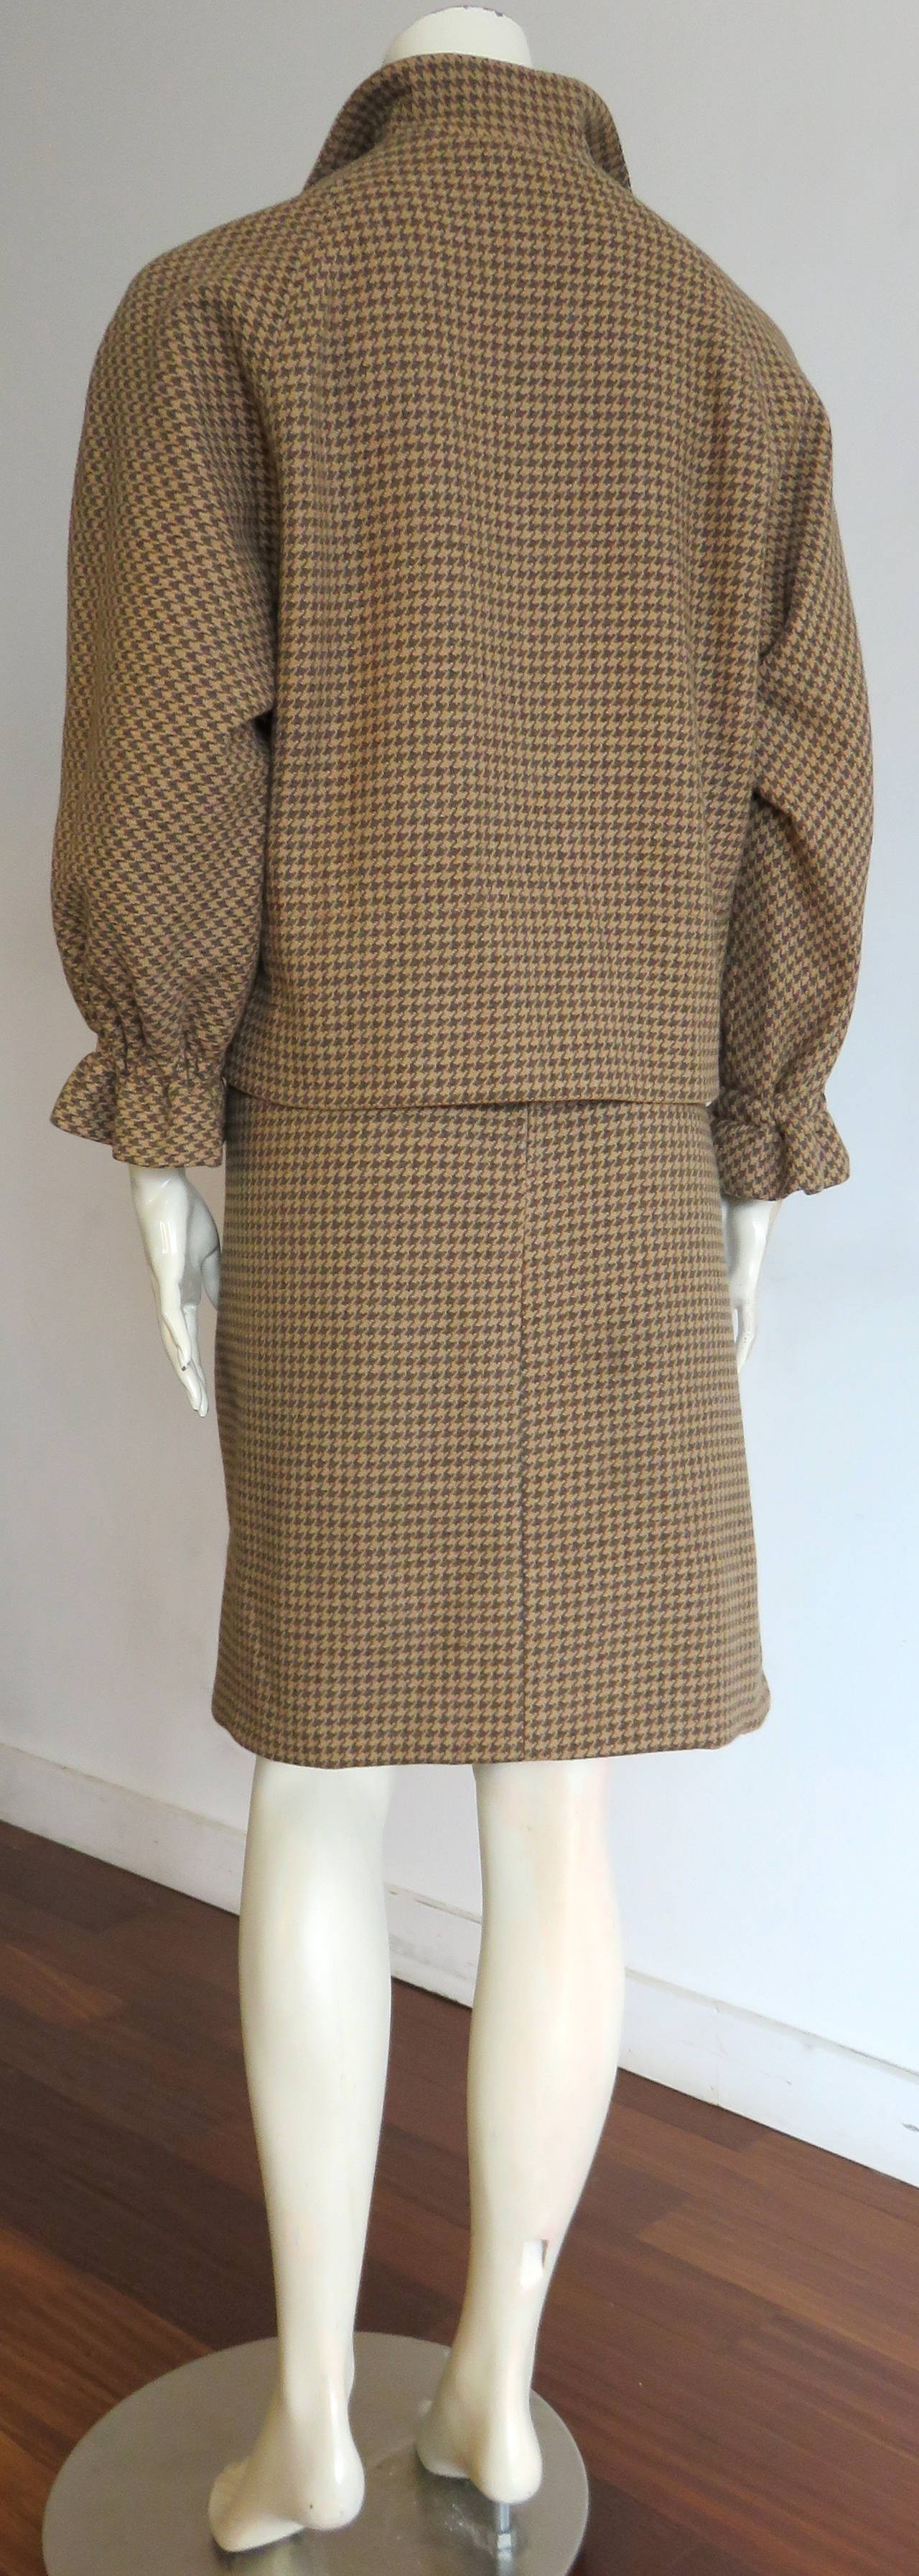 1960's PIERRE CARDIN PARIS Wool houndstooth skirt suit For Sale 3